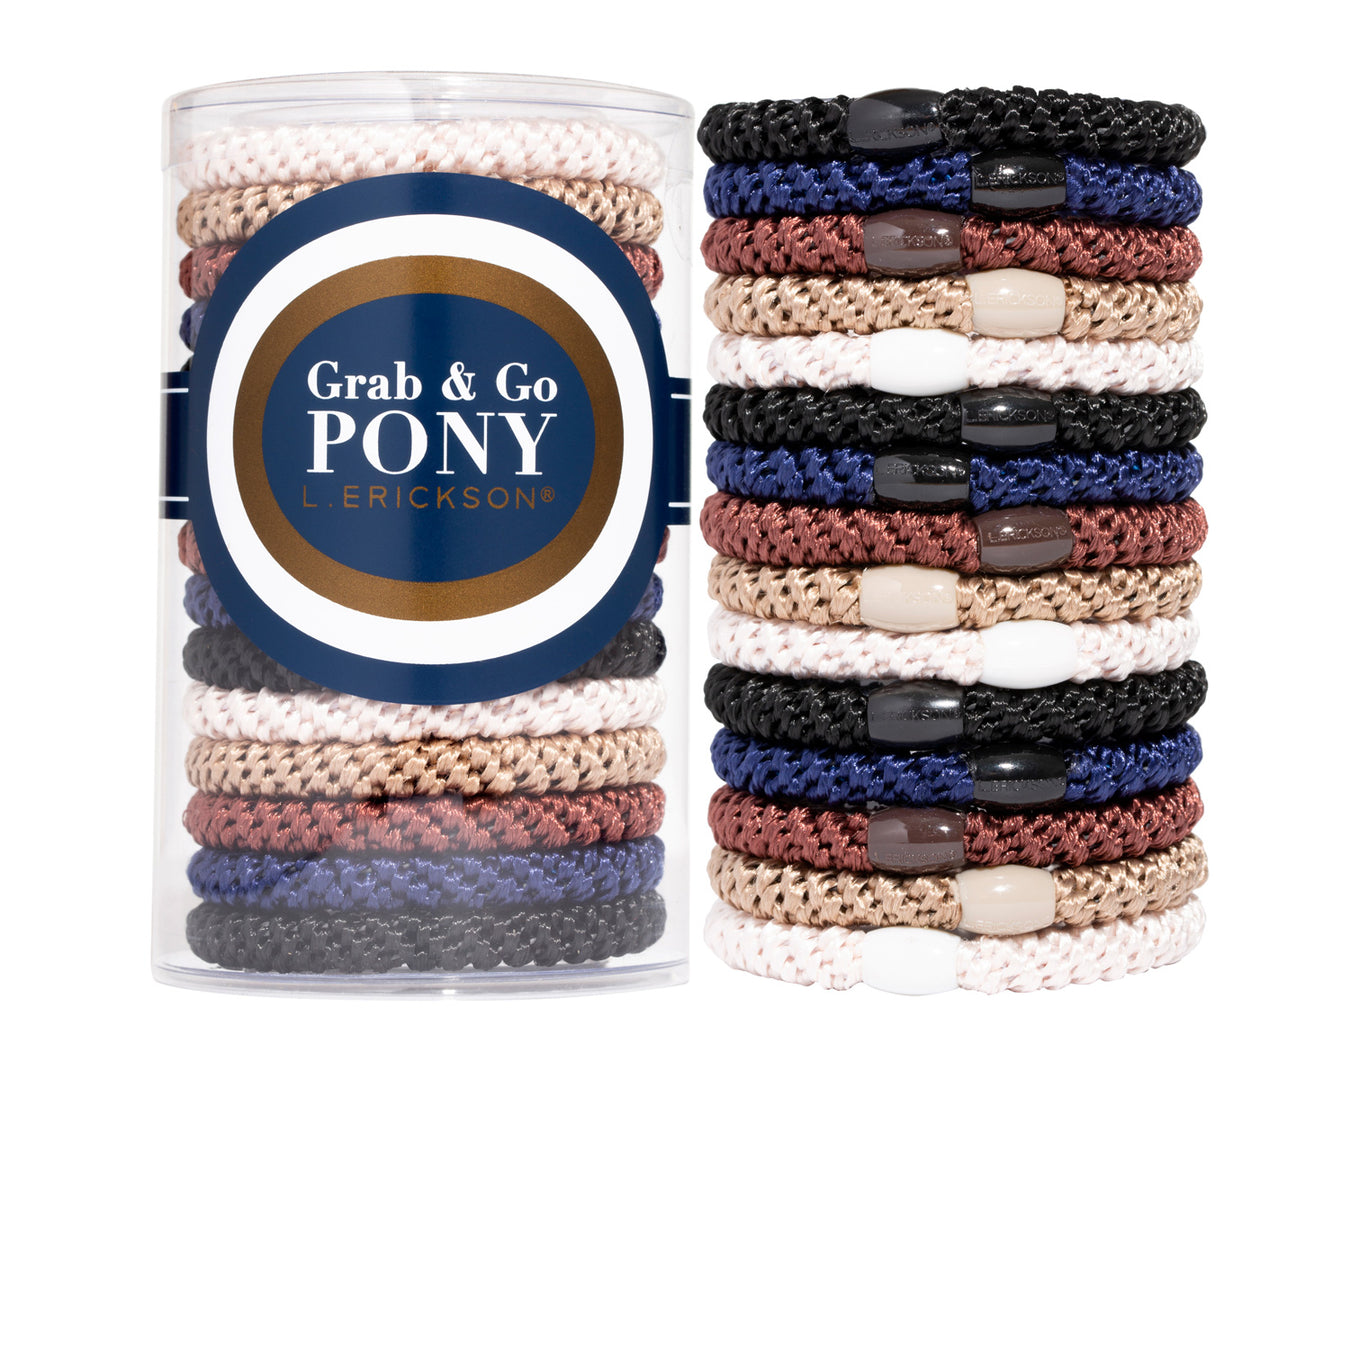 Hair ties for thick hair by L. Erickson, Grab & Go Pony Tube